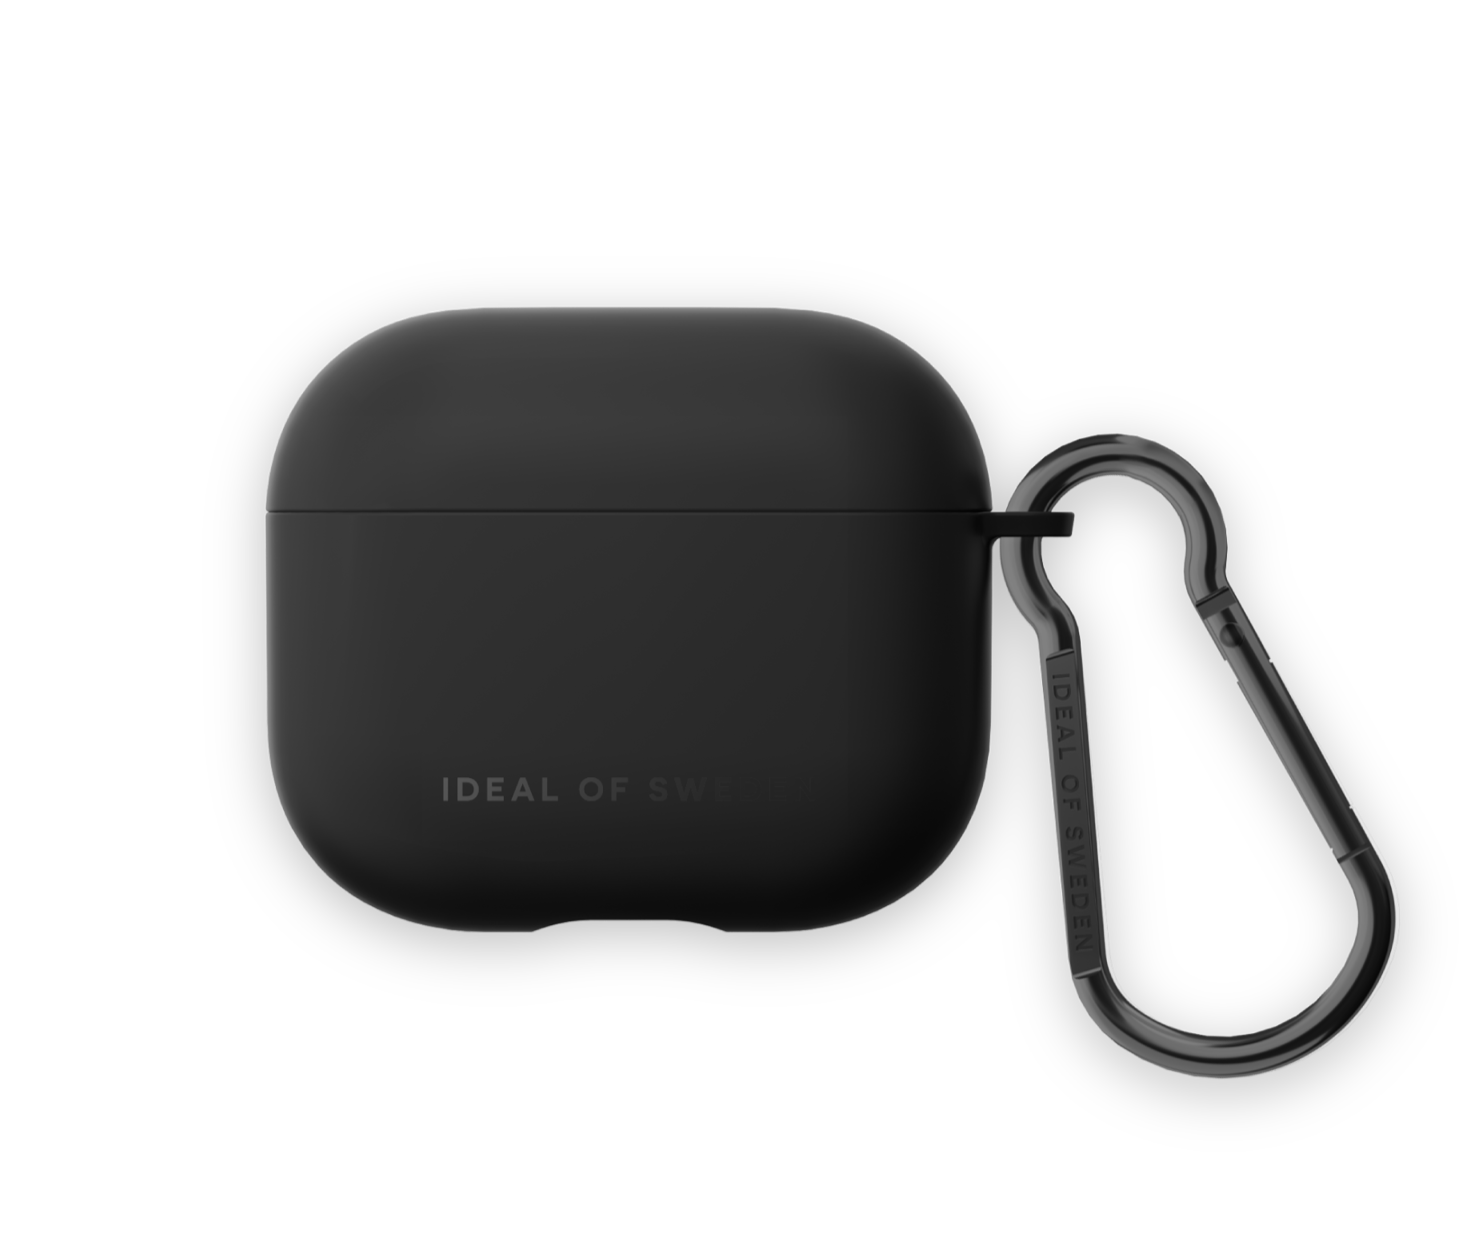 Ideal of Sweden Airpods Case 3rd Generation